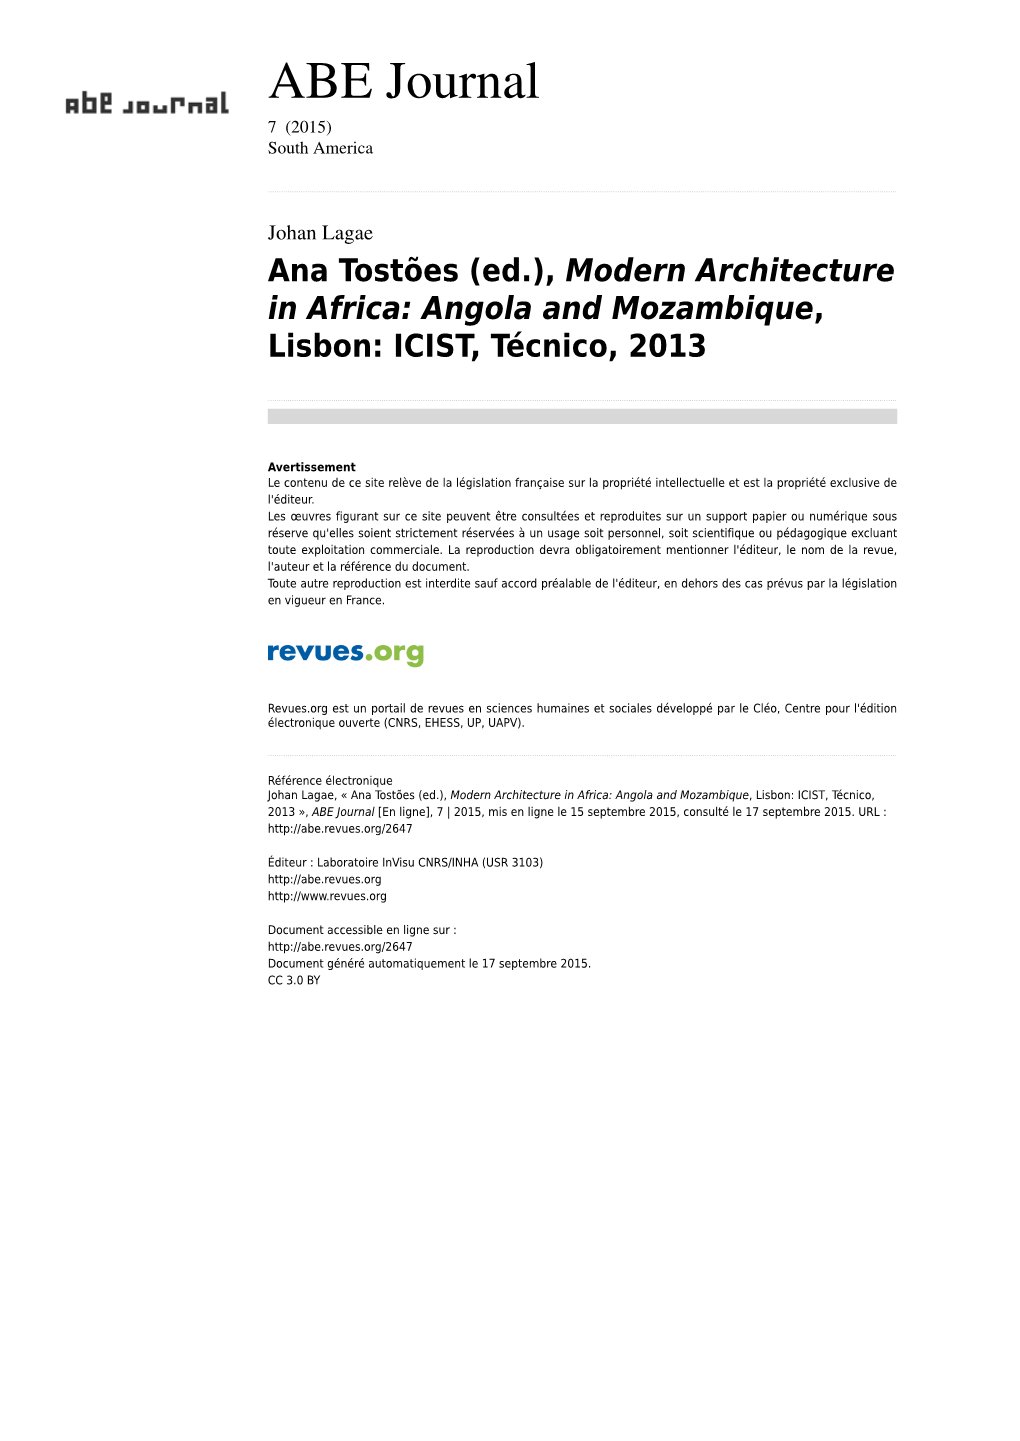 Modern Architecture in Africa: Angola and Mozambique, Lisbon: ICIST, Técnico, 2013